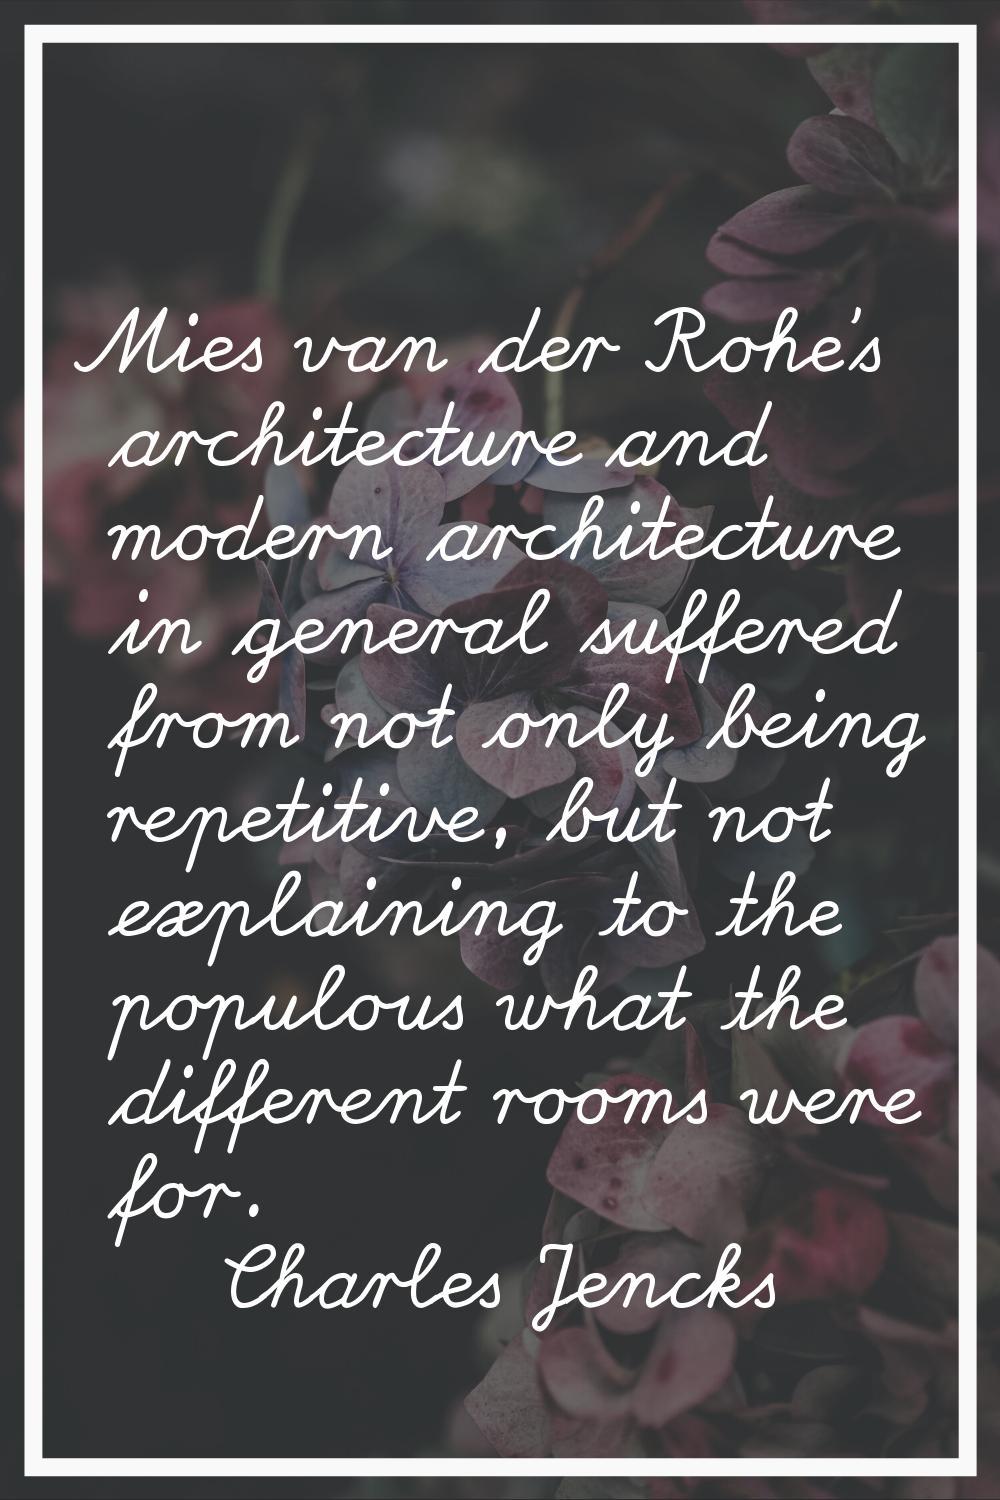 Mies van der Rohe's architecture and modern architecture in general suffered from not only being re